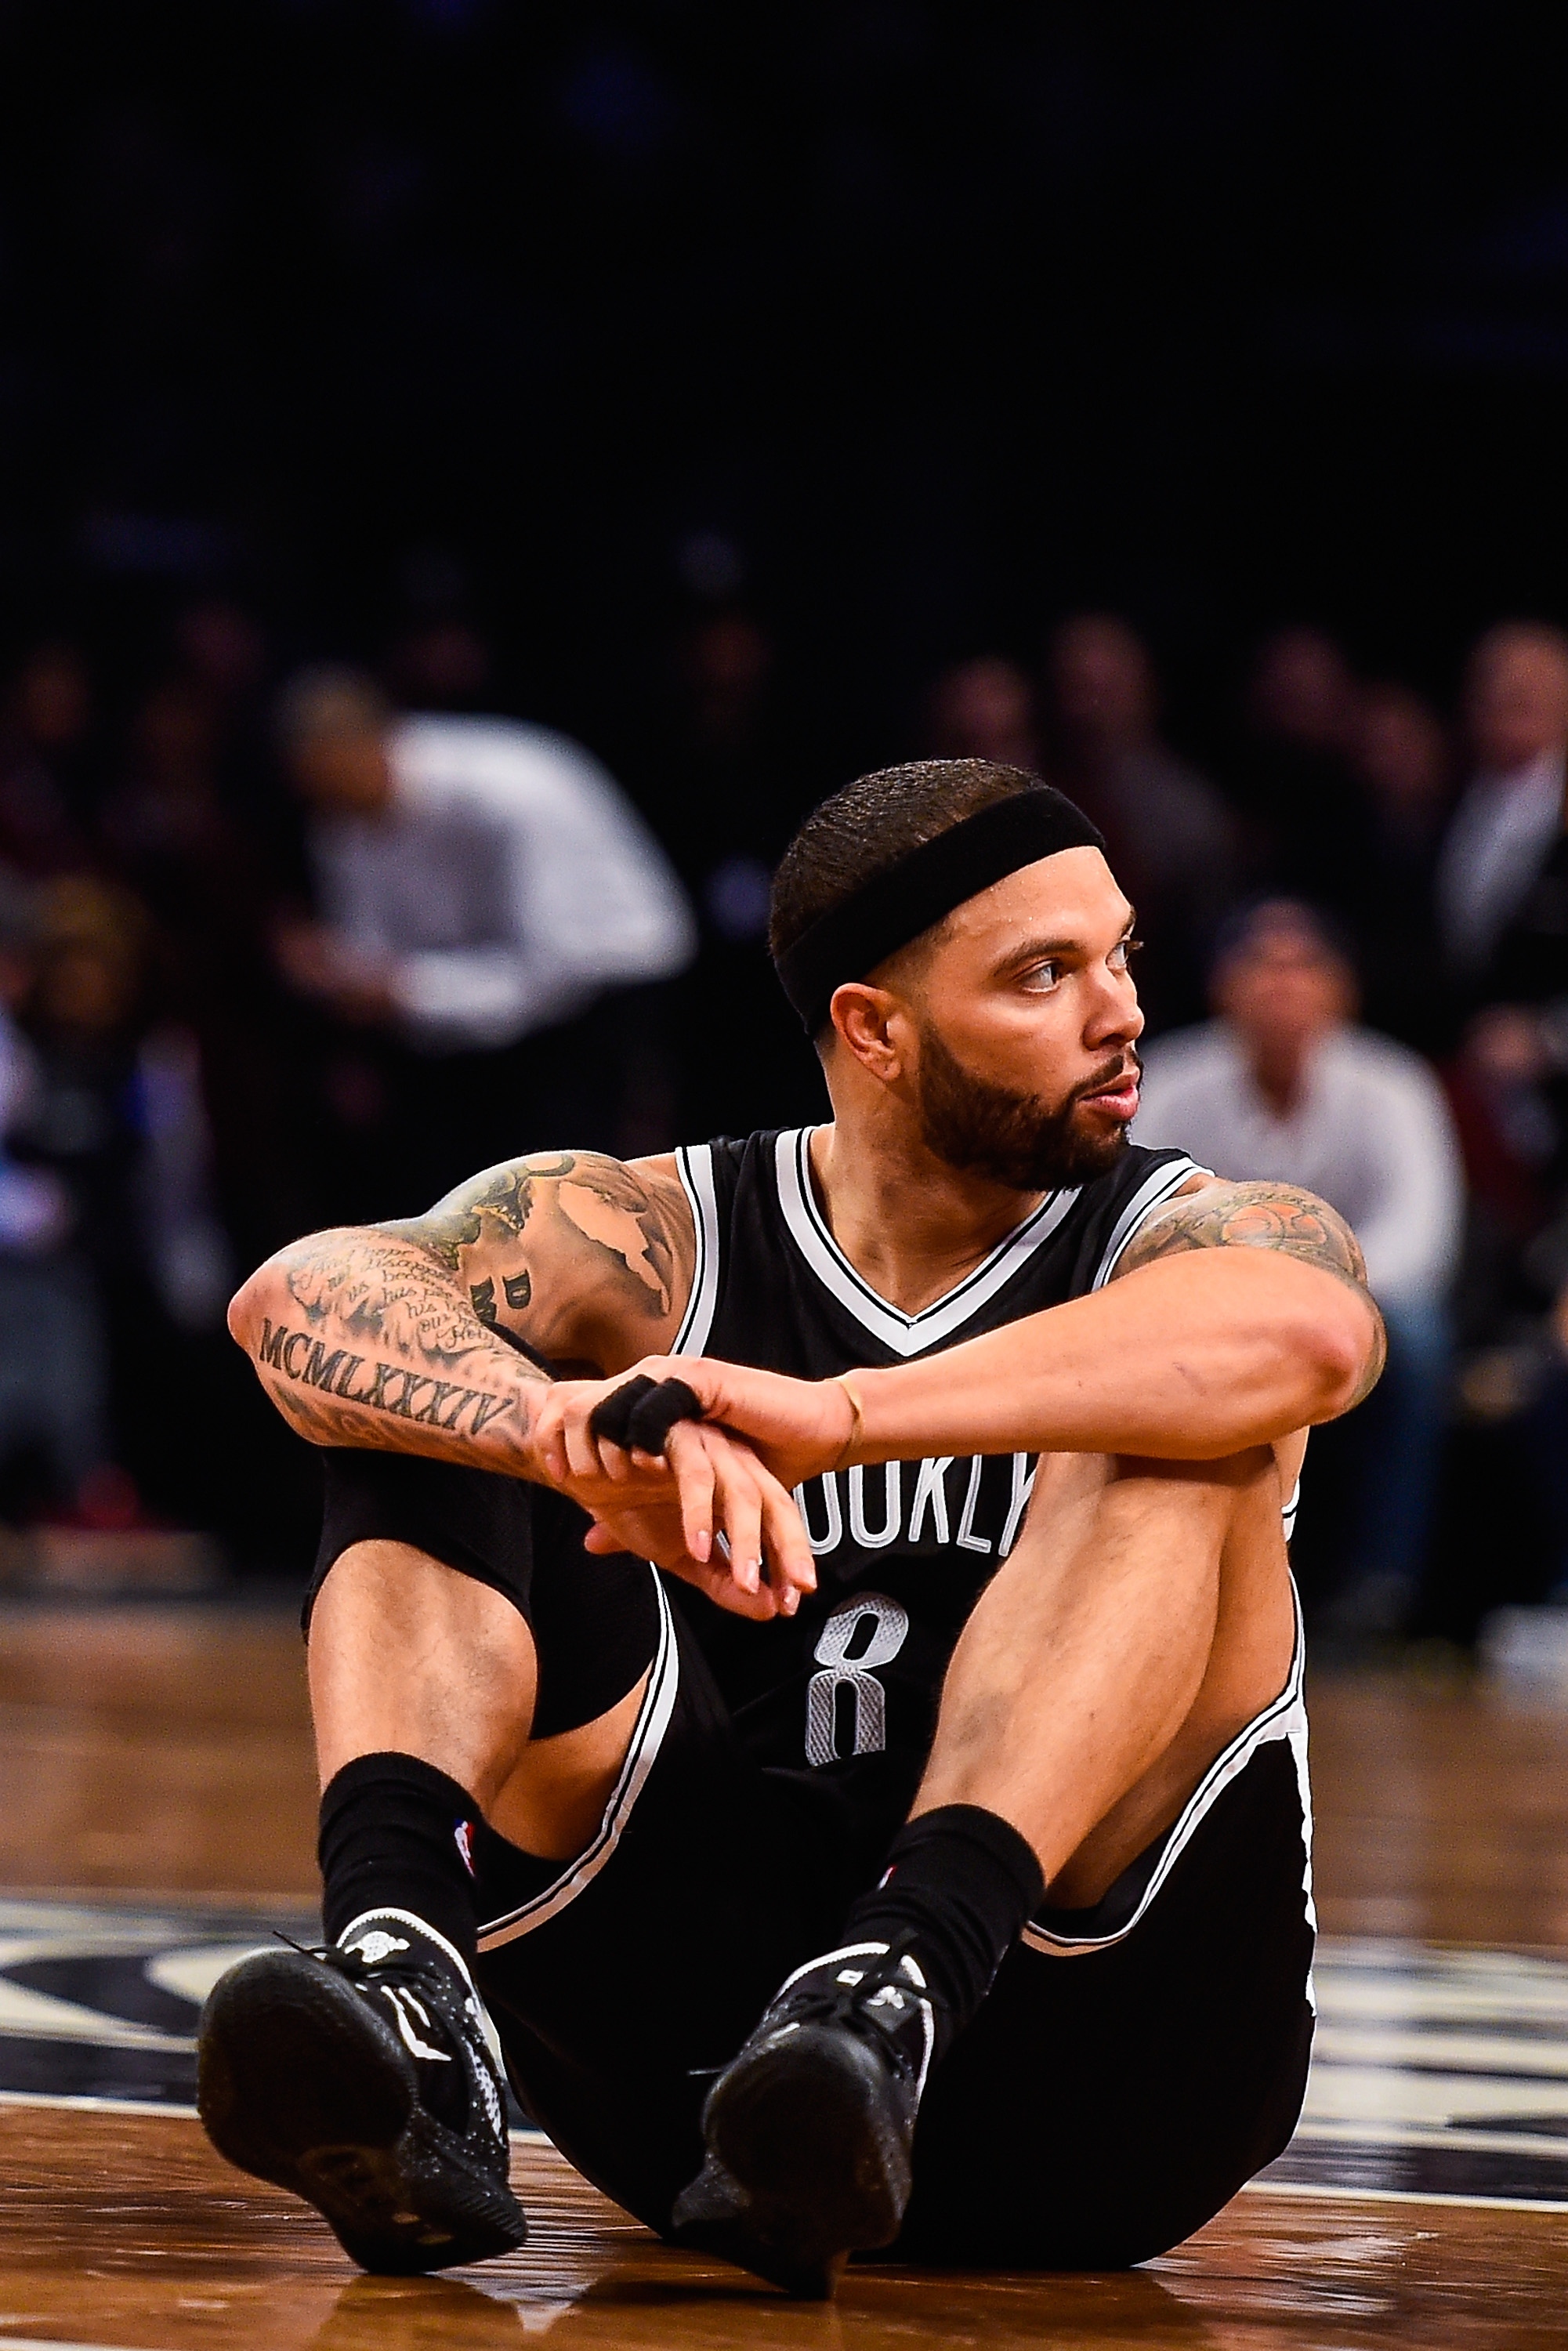 NEW YORK, NY - APRIL 25: Deron Williams #8 of the Brooklyn Nets looks on during the first round of the 2015 NBA Playoffs against the Atlanta Hawks at Barclays Center on April 25, 2015 in the Brooklyn borough of New York City. NOTE TO USER: User expressly acknowledges and agrees that, by downloading and/or using this photograph, user is consenting to the terms and conditions of the Getty Images License Agreement.  (Photo by Alex Goodlett/Getty Images)